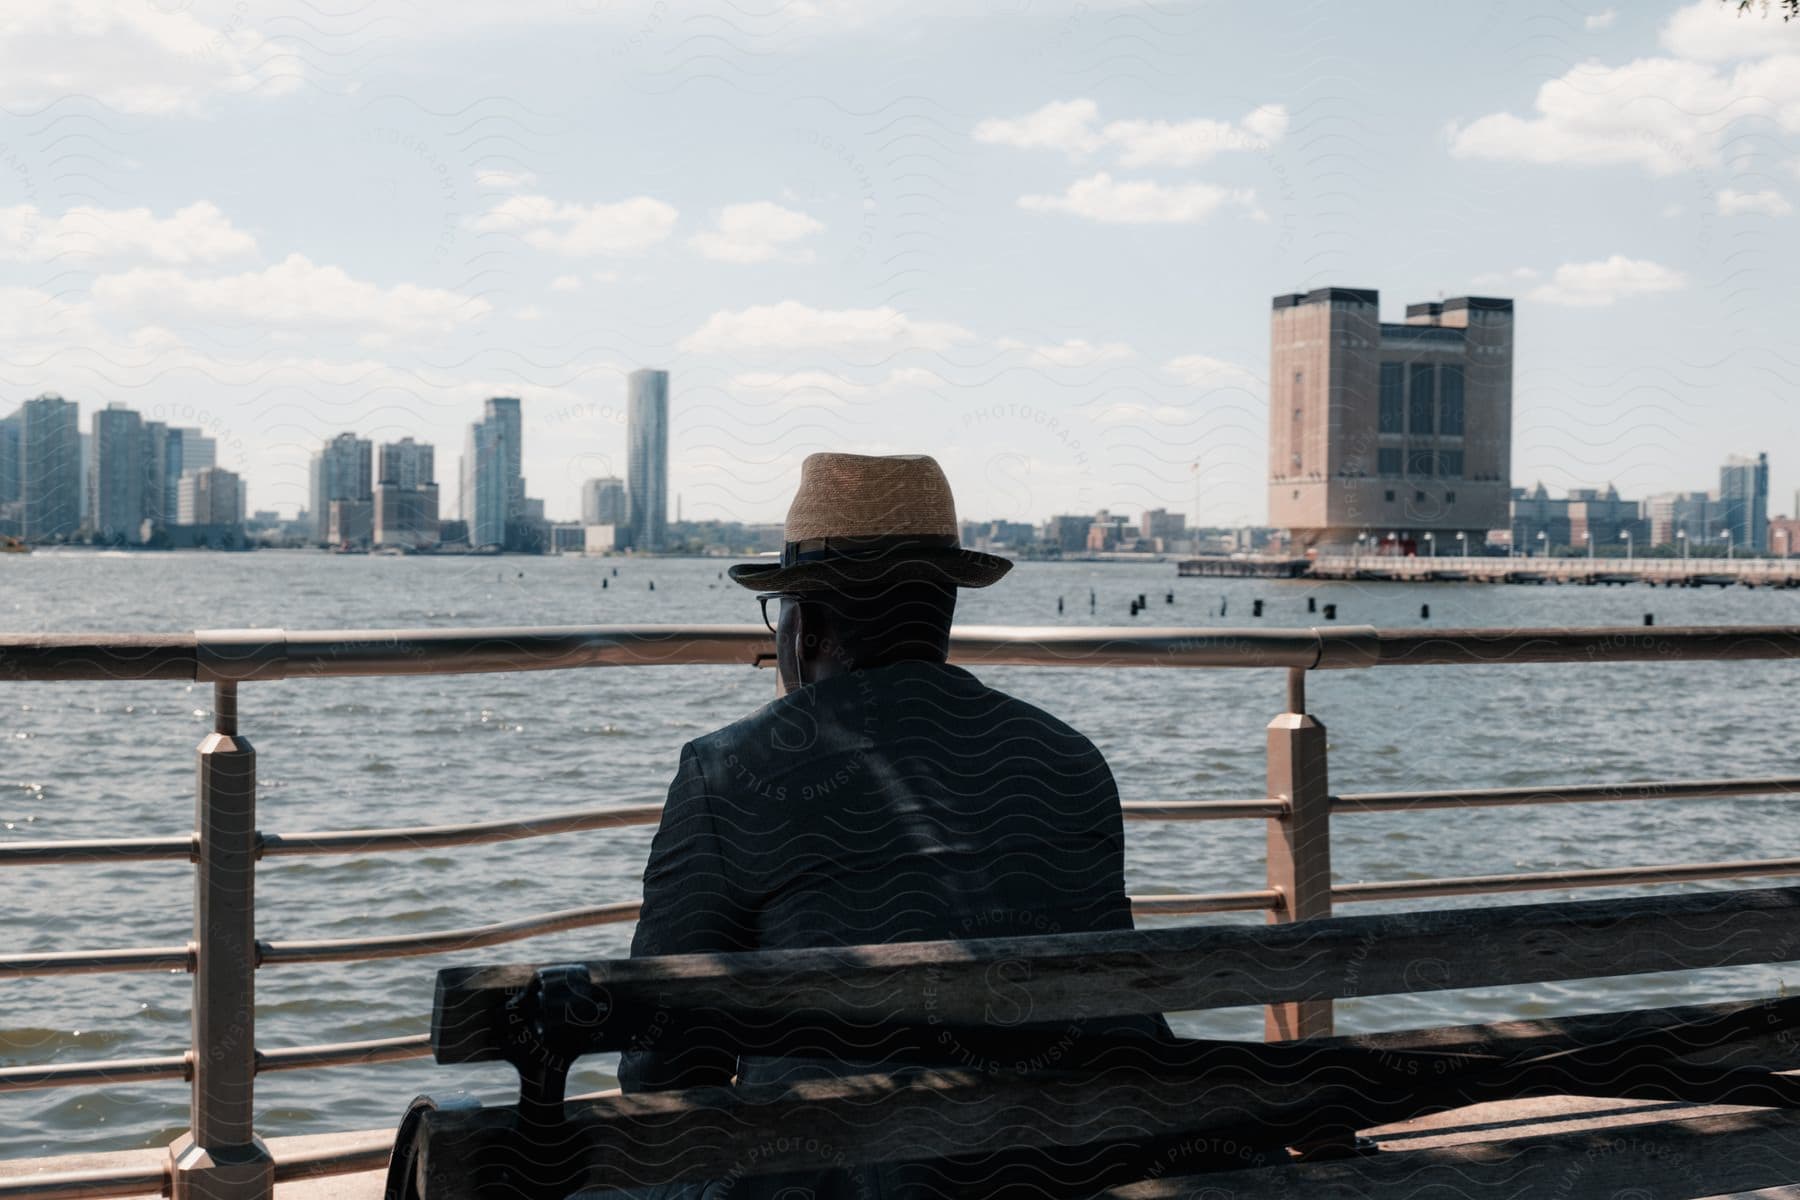 A man is sitting on a bench near a body of water enjoying the view of the city buildings.